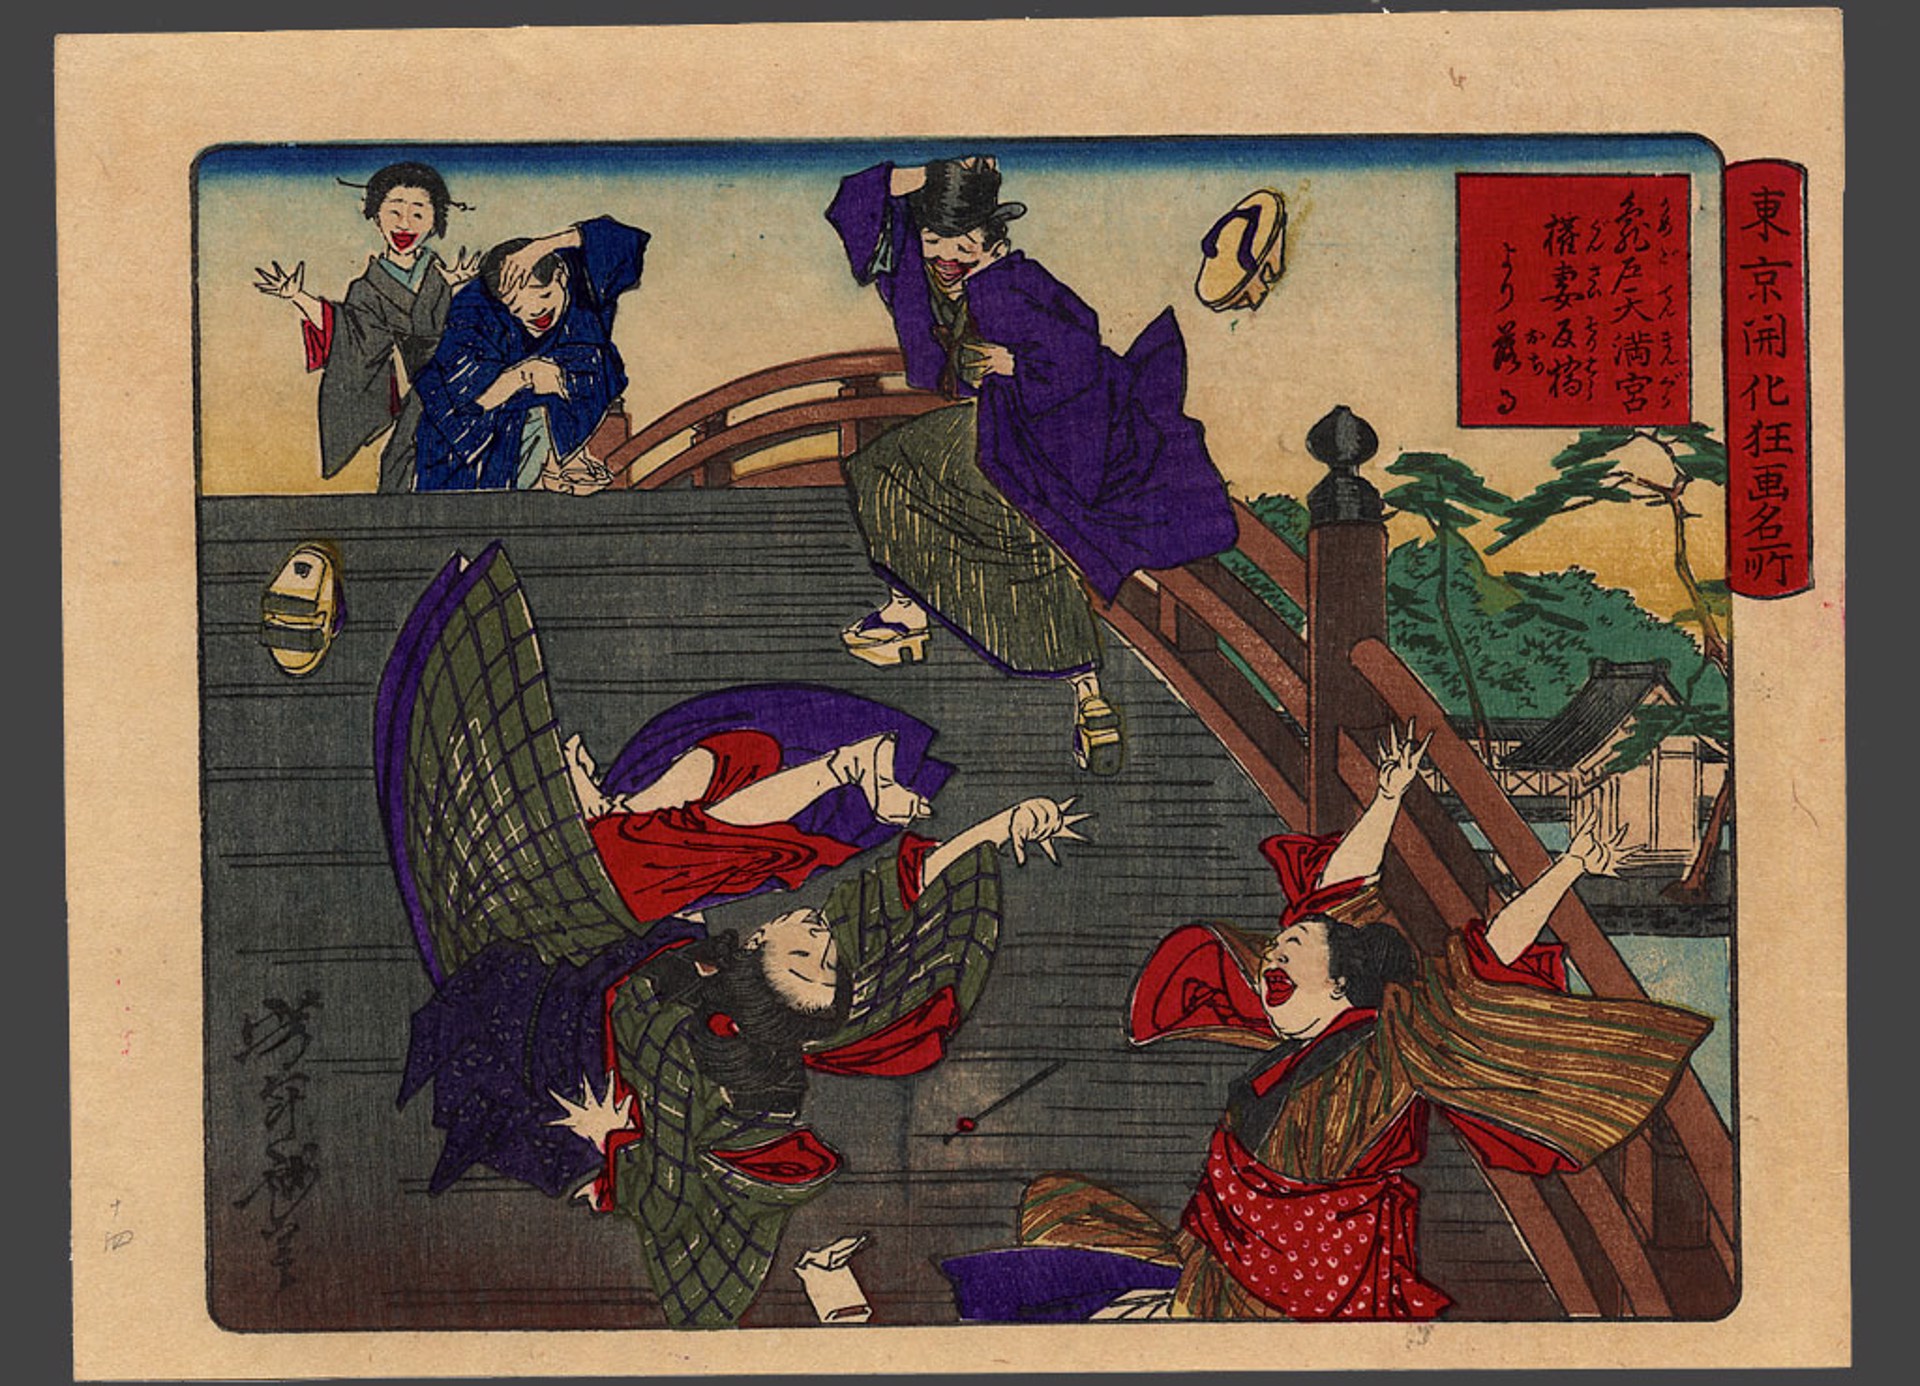 A woman falling down the Drum Bridge at Temmangu Shrine, Kameido Comic pictures of famous places amid the civiization of Tokyo by Yoshitoshi